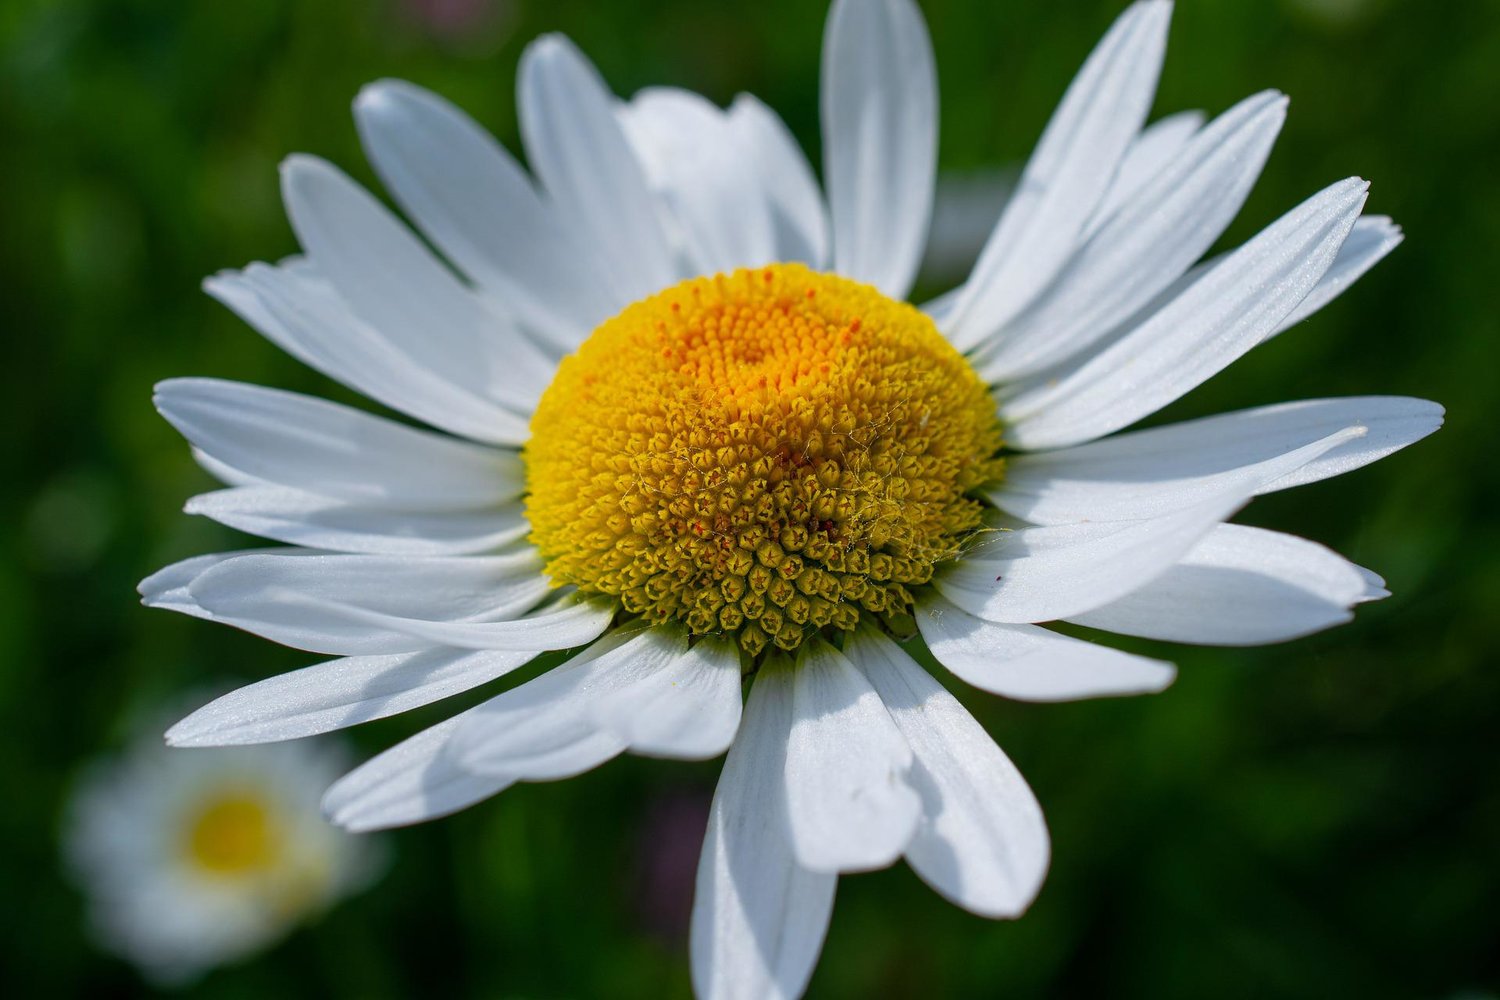 The arrival of daisies often coincides with the last days of school.